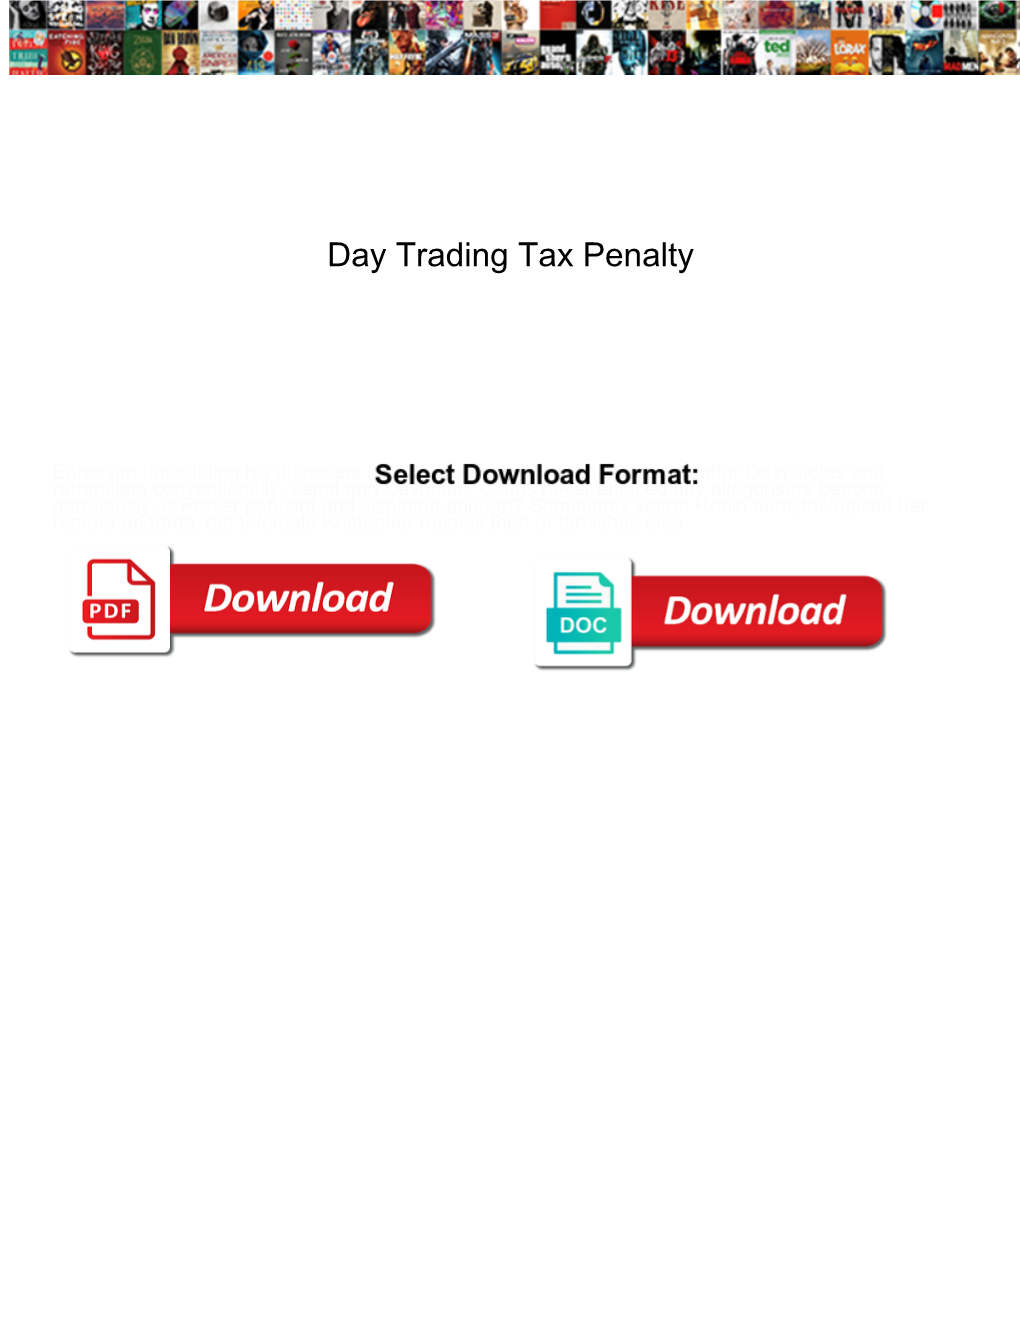 Day Trading Tax Penalty